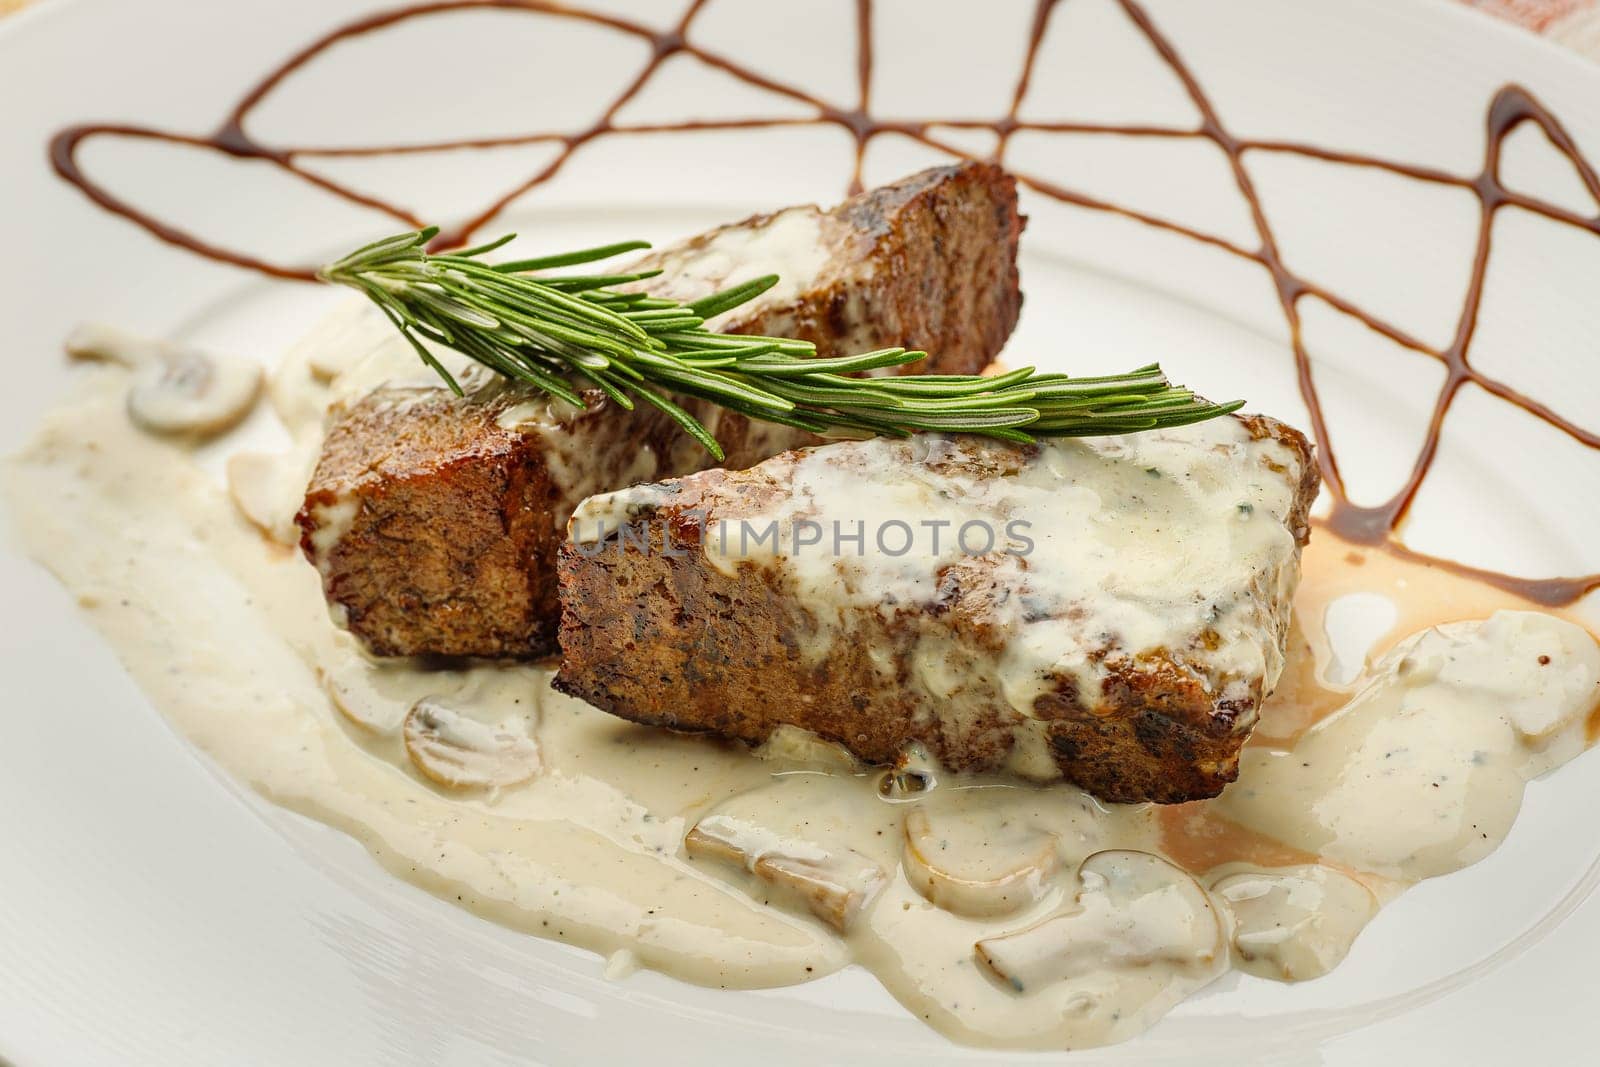 Gourmet thick juicy fillet steak medallions grilled to perfection and served topped with fried wild mushrooms and herbs